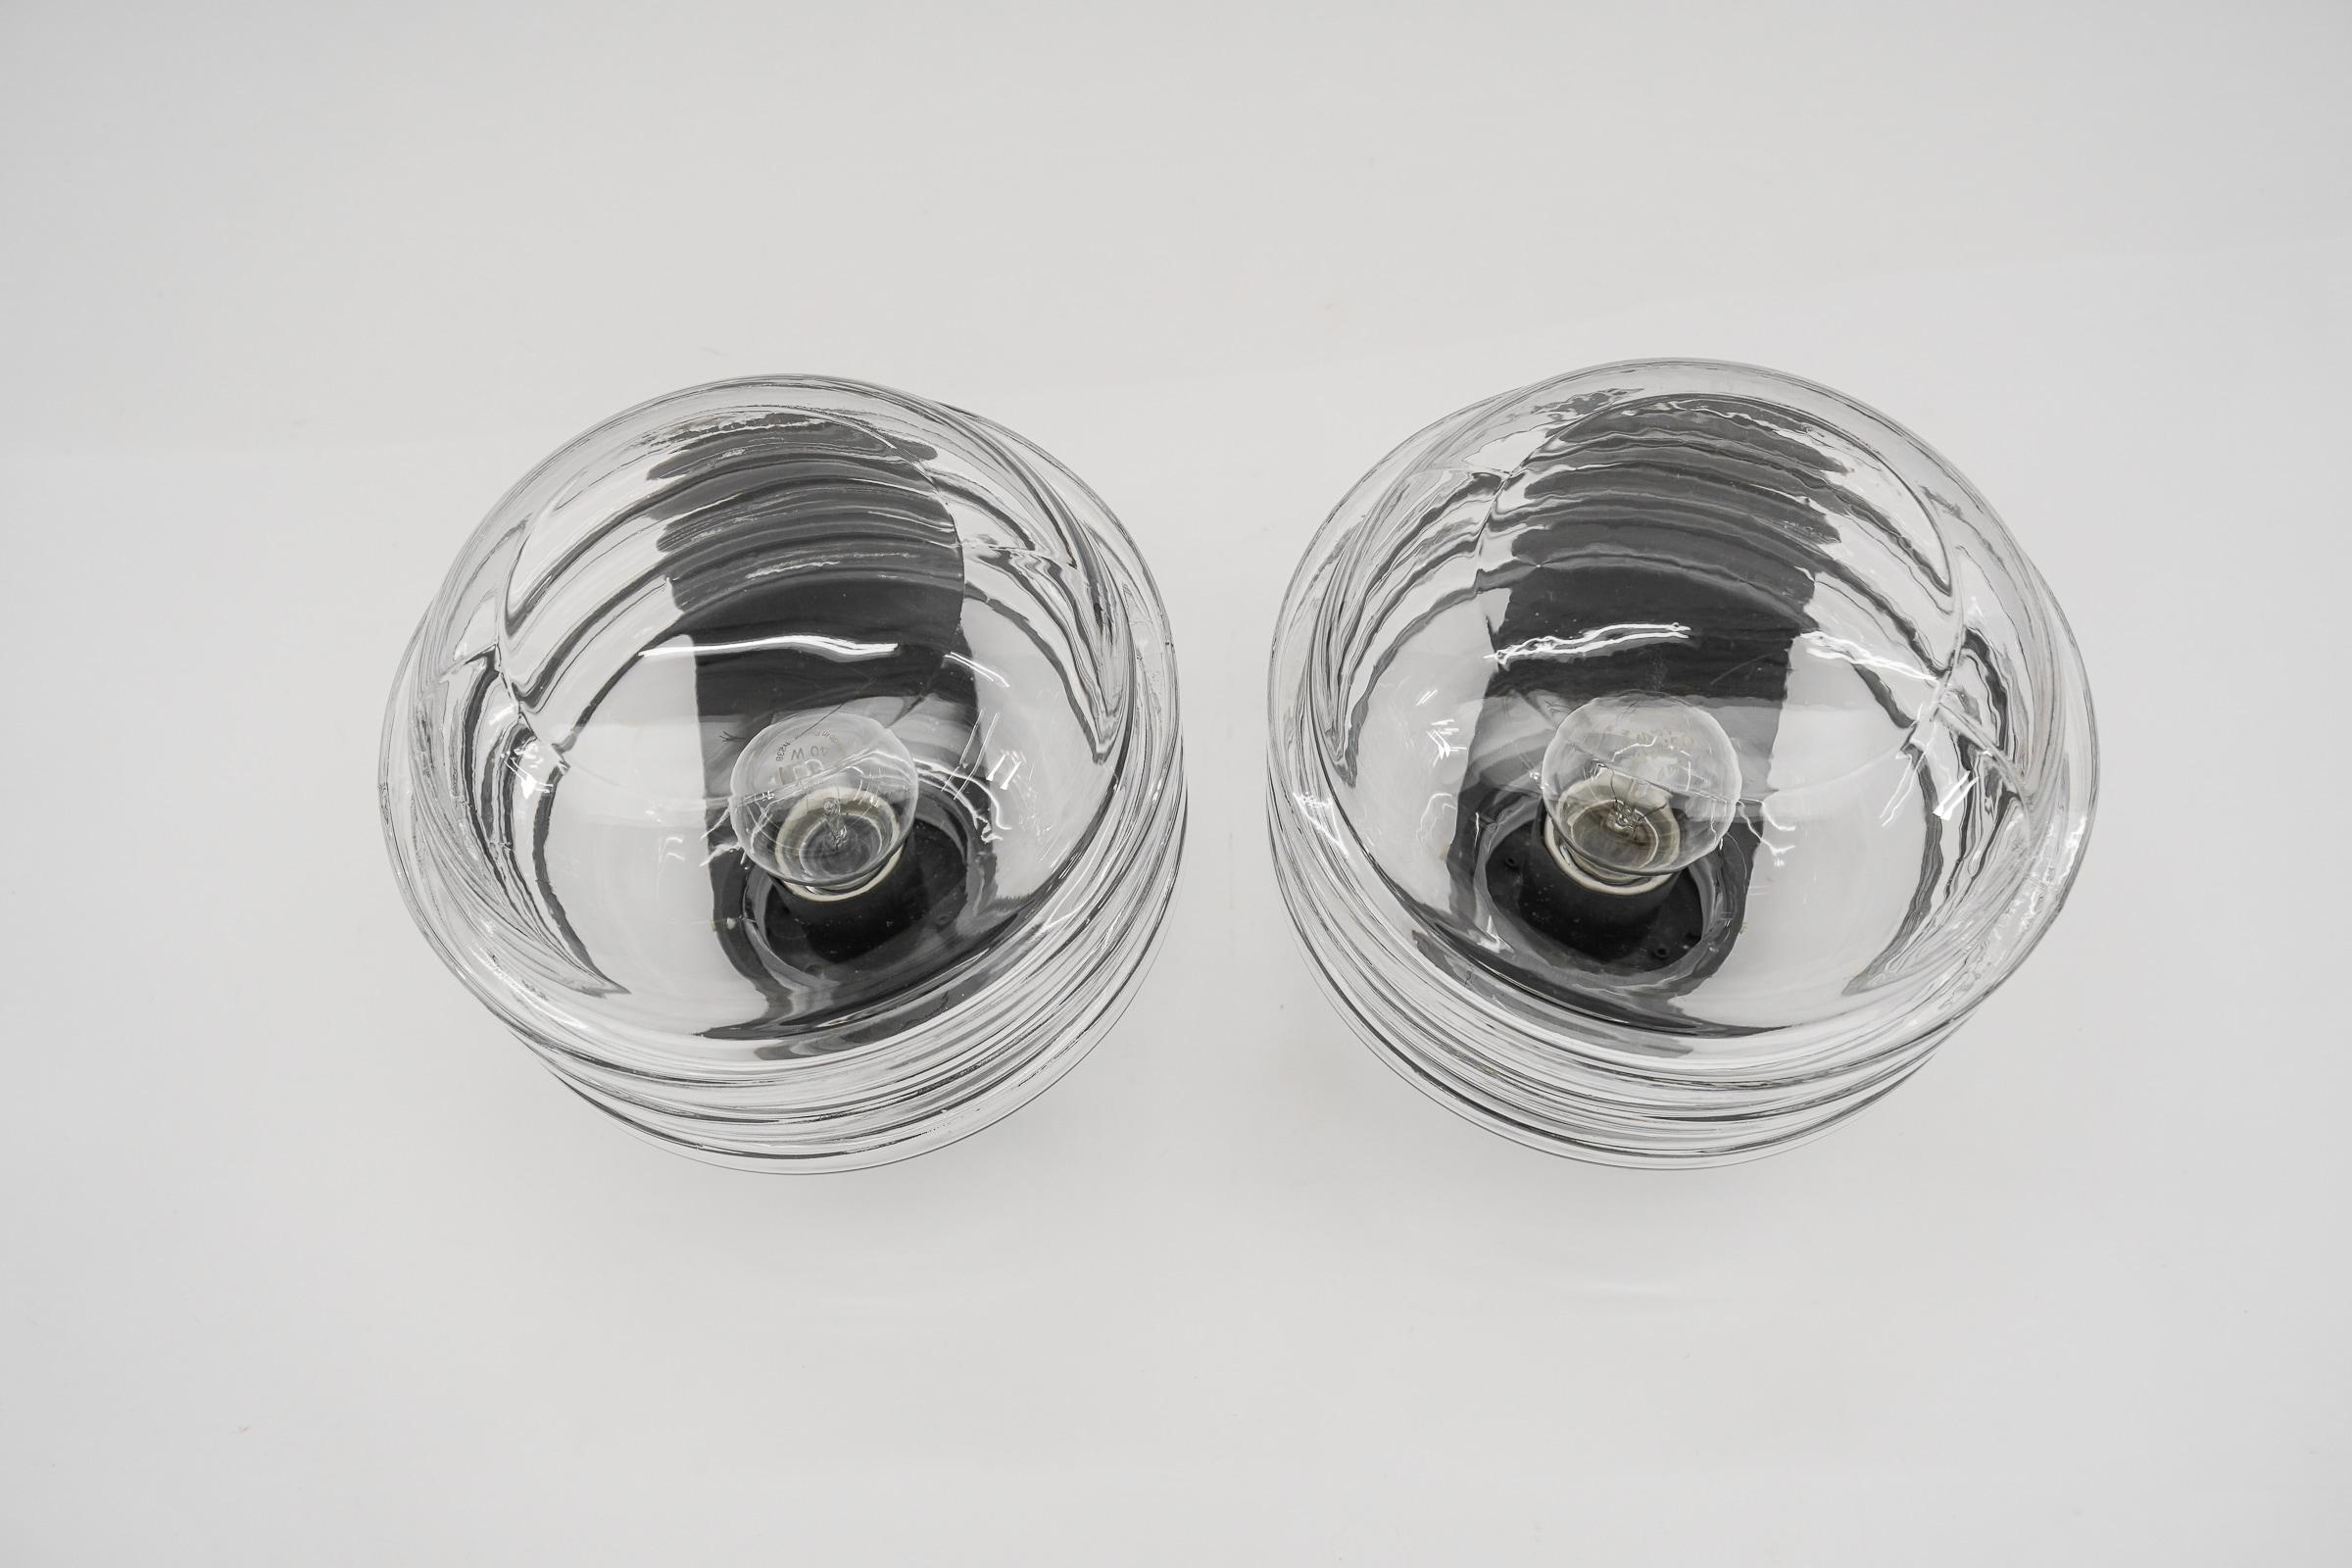 Pair of Space Age Outdoor Wall Lamps in Black and Clear Glass, 1970s For Sale 4